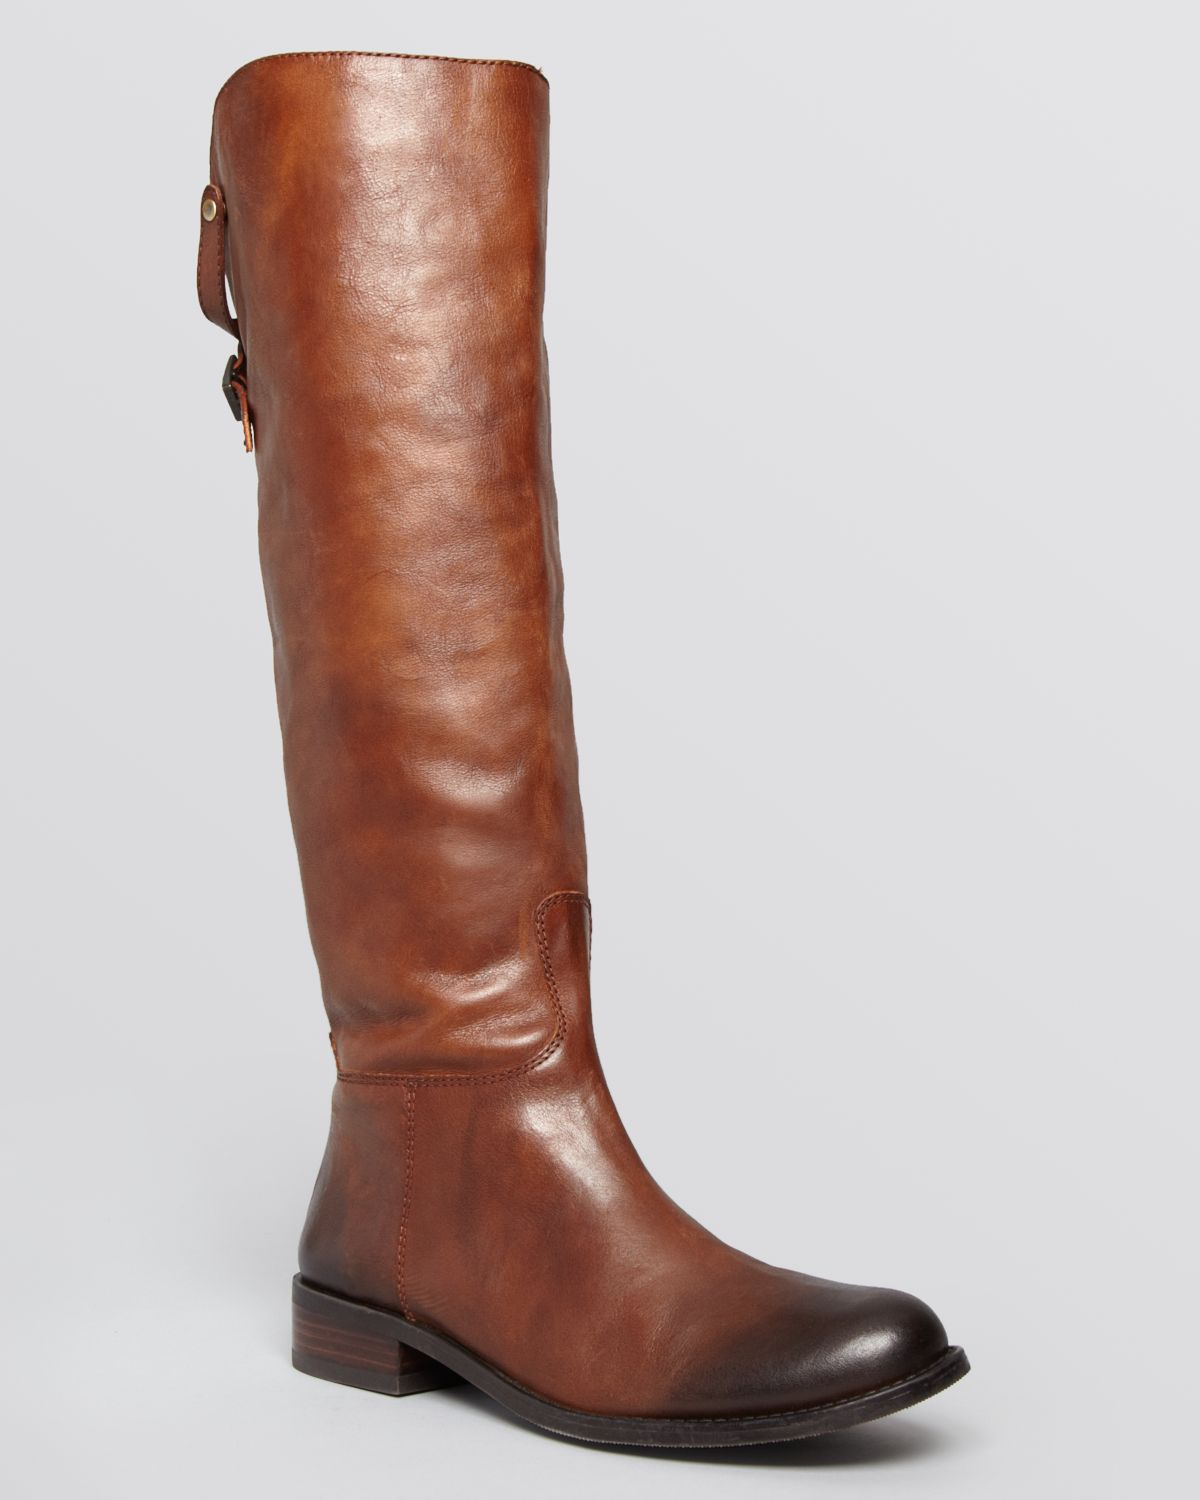 Vince Camuto Tall Riding Boots - Kadia Back Buckle in Brown - Lyst